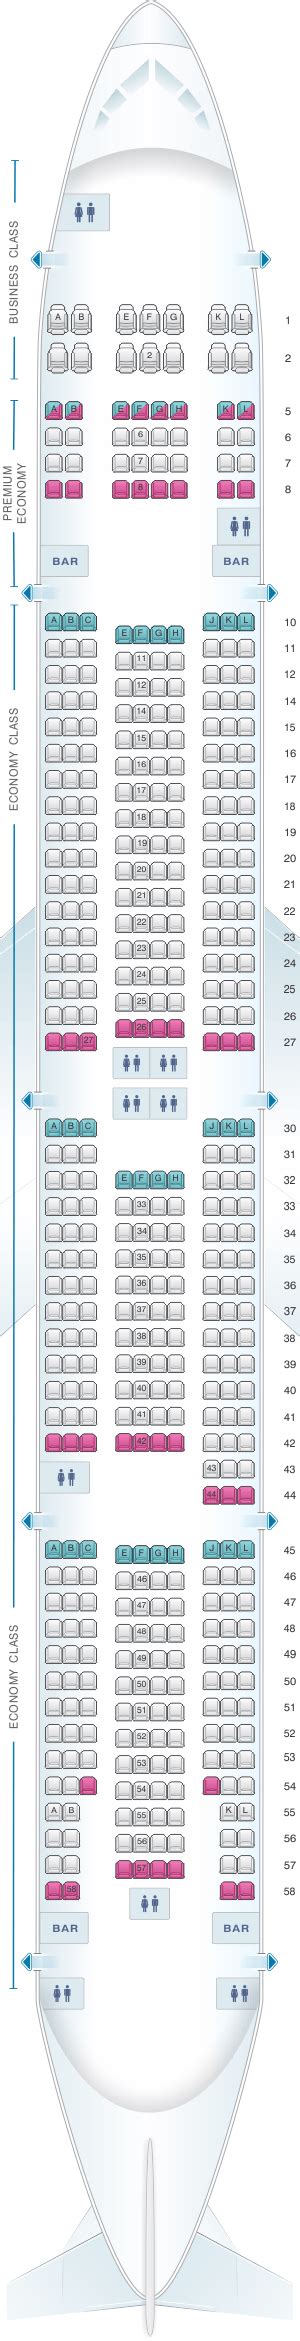 Boeing 777 200 Seating Plan Air France Awesome Home